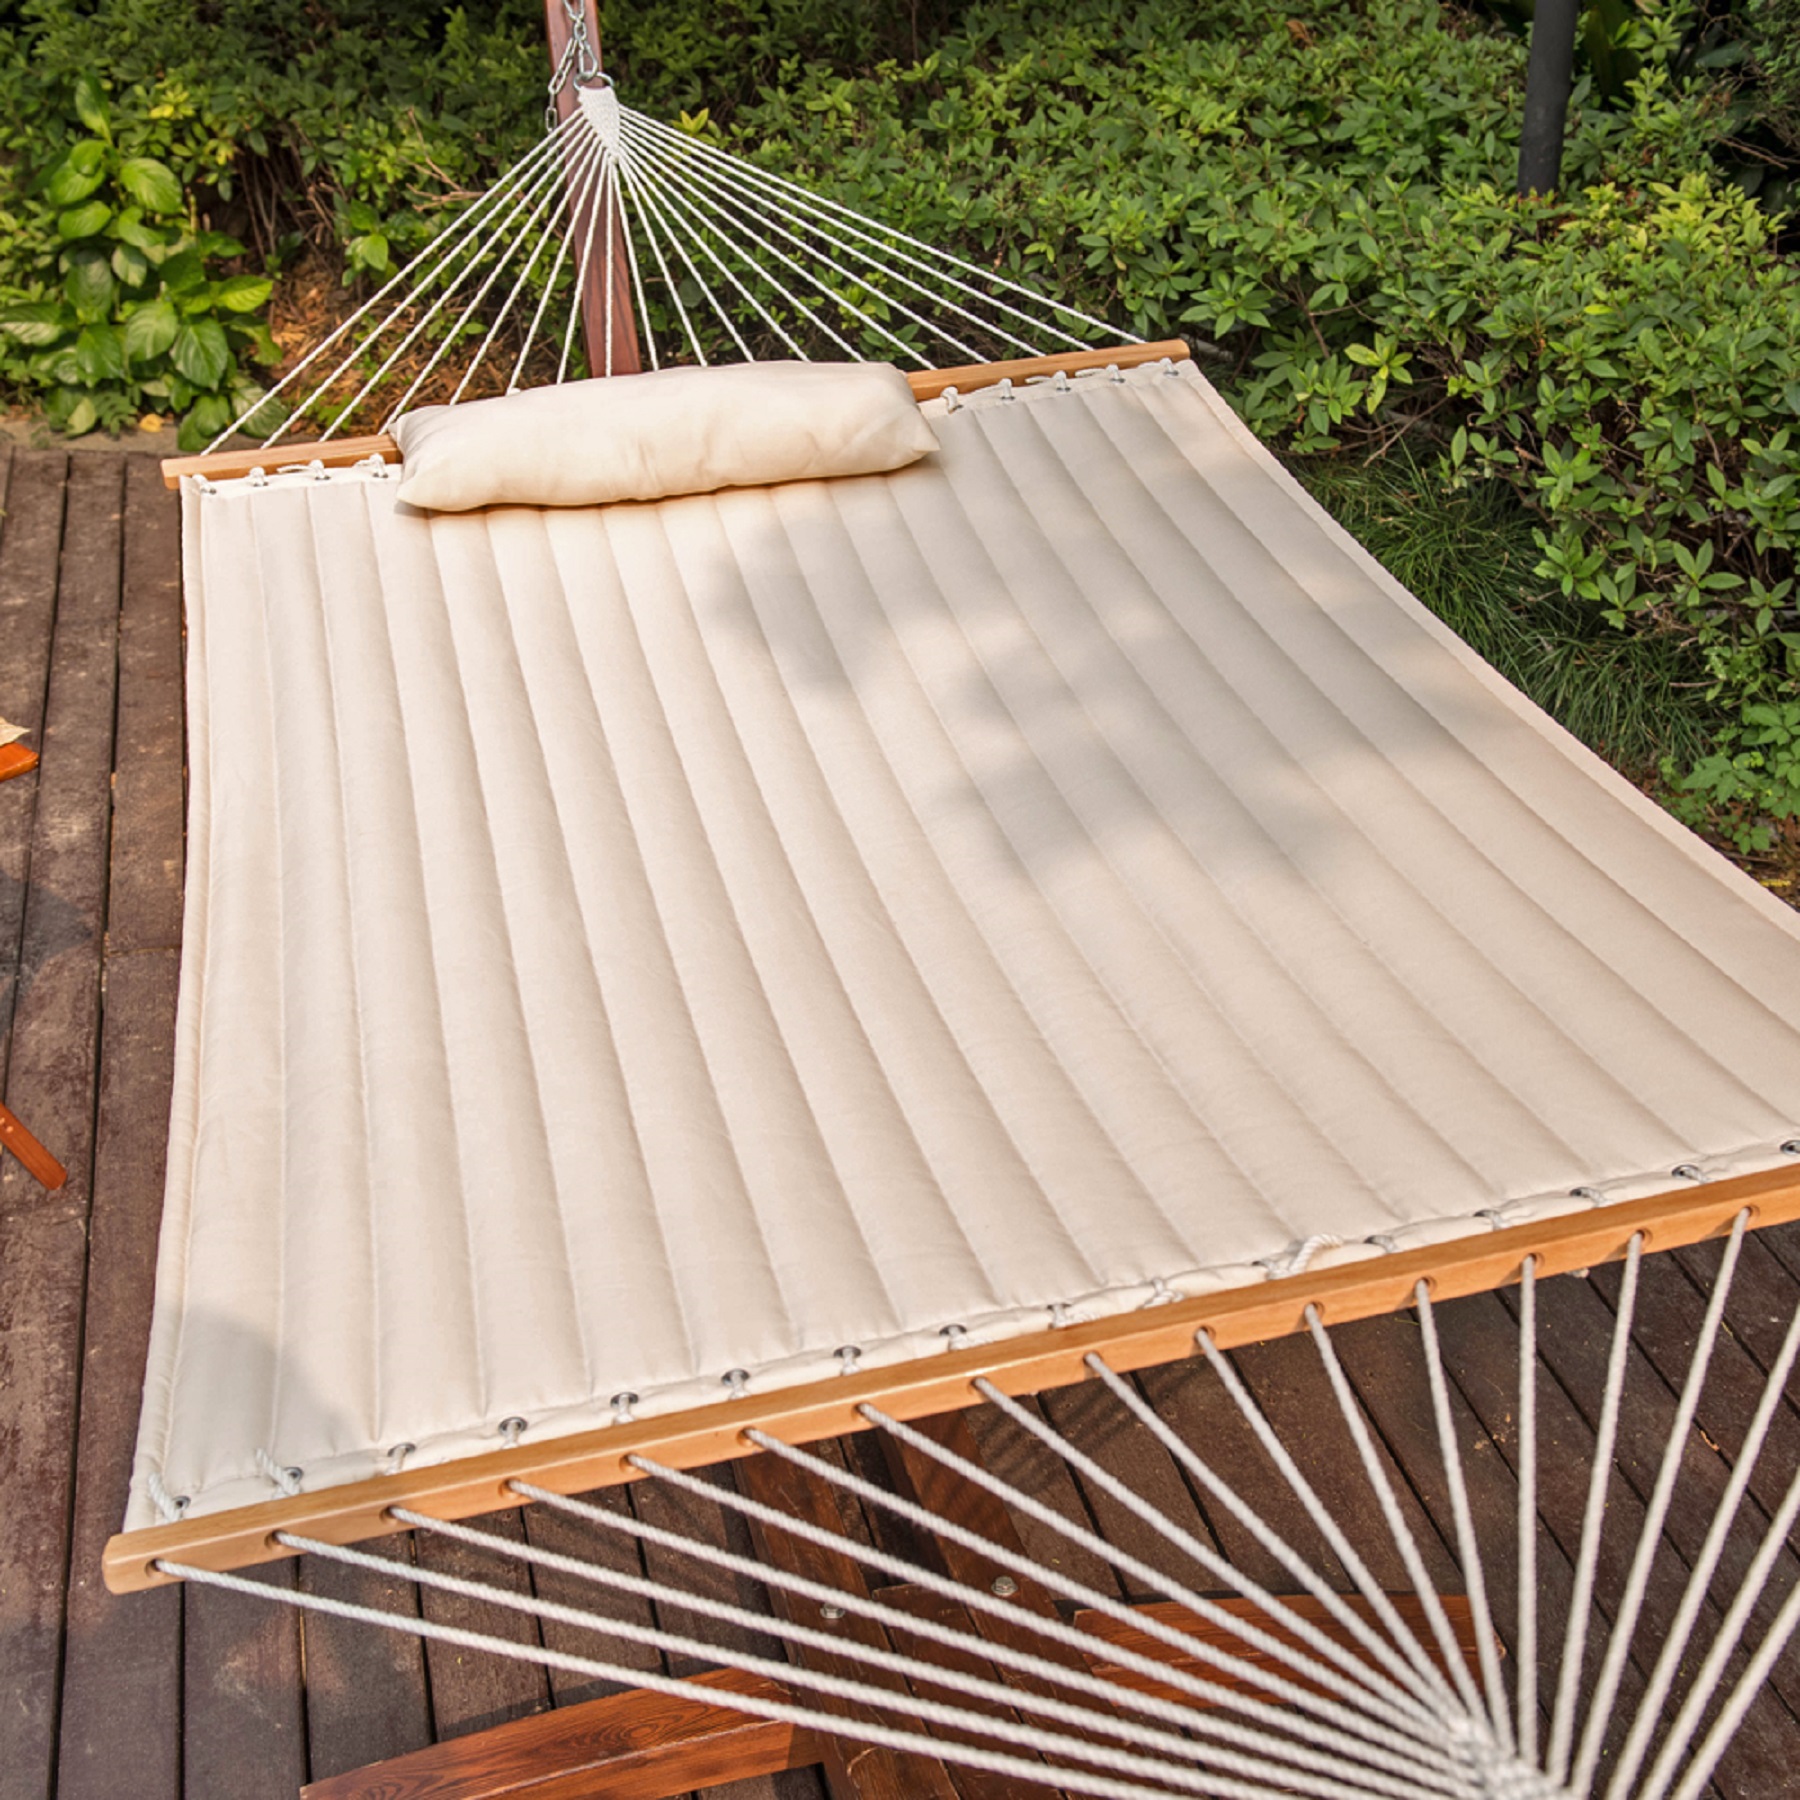 Double Quilted Cotton Fabric Swing Hammock with Pillow Beige 450 lbs Capacity without Stand - image 1 of 8